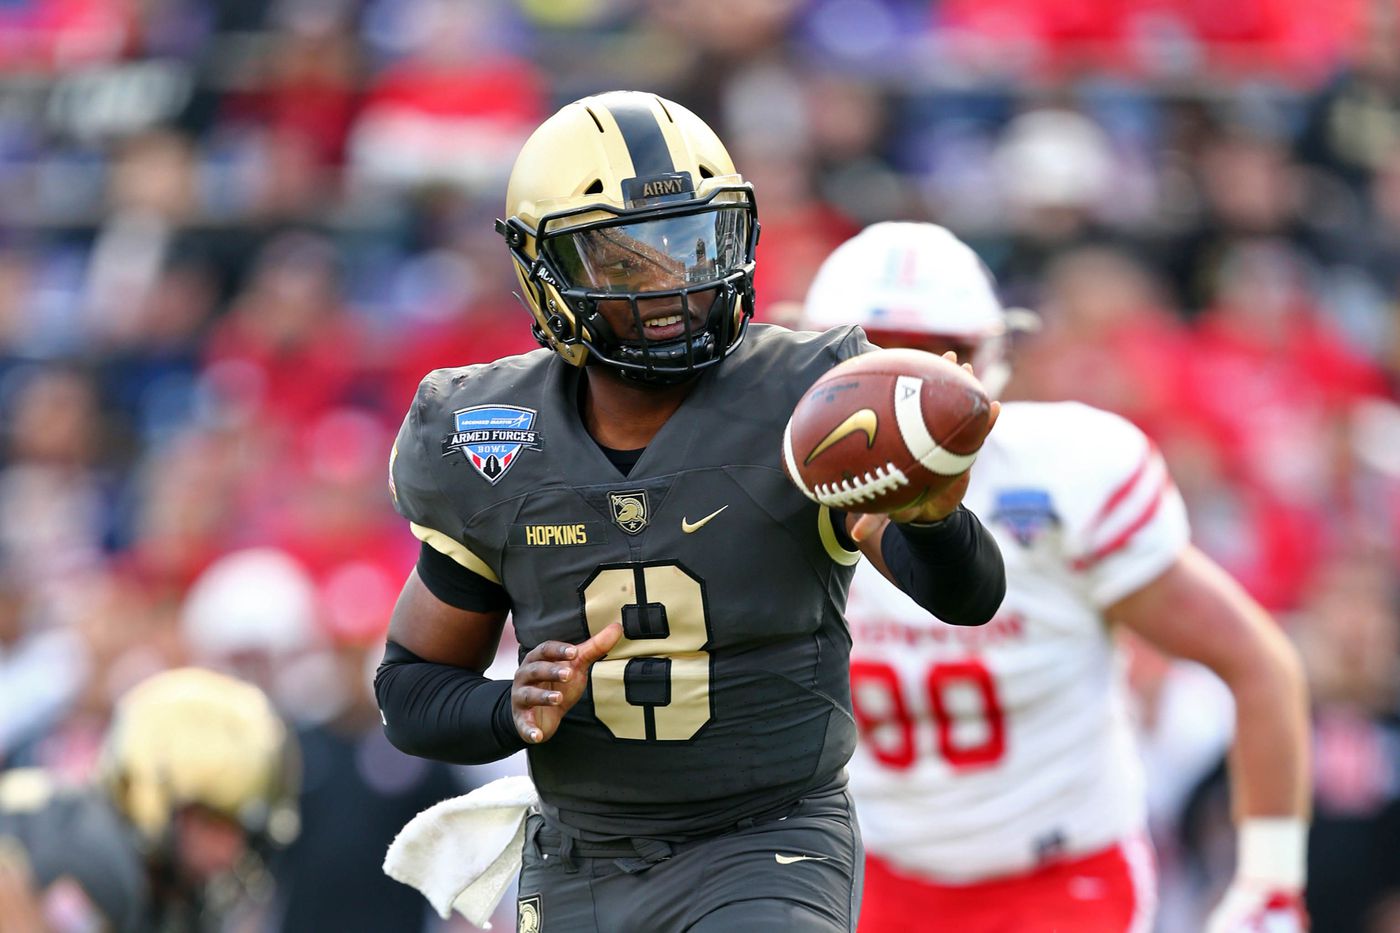 2019 college football preview: A look at Army’s quarterbacks - Against